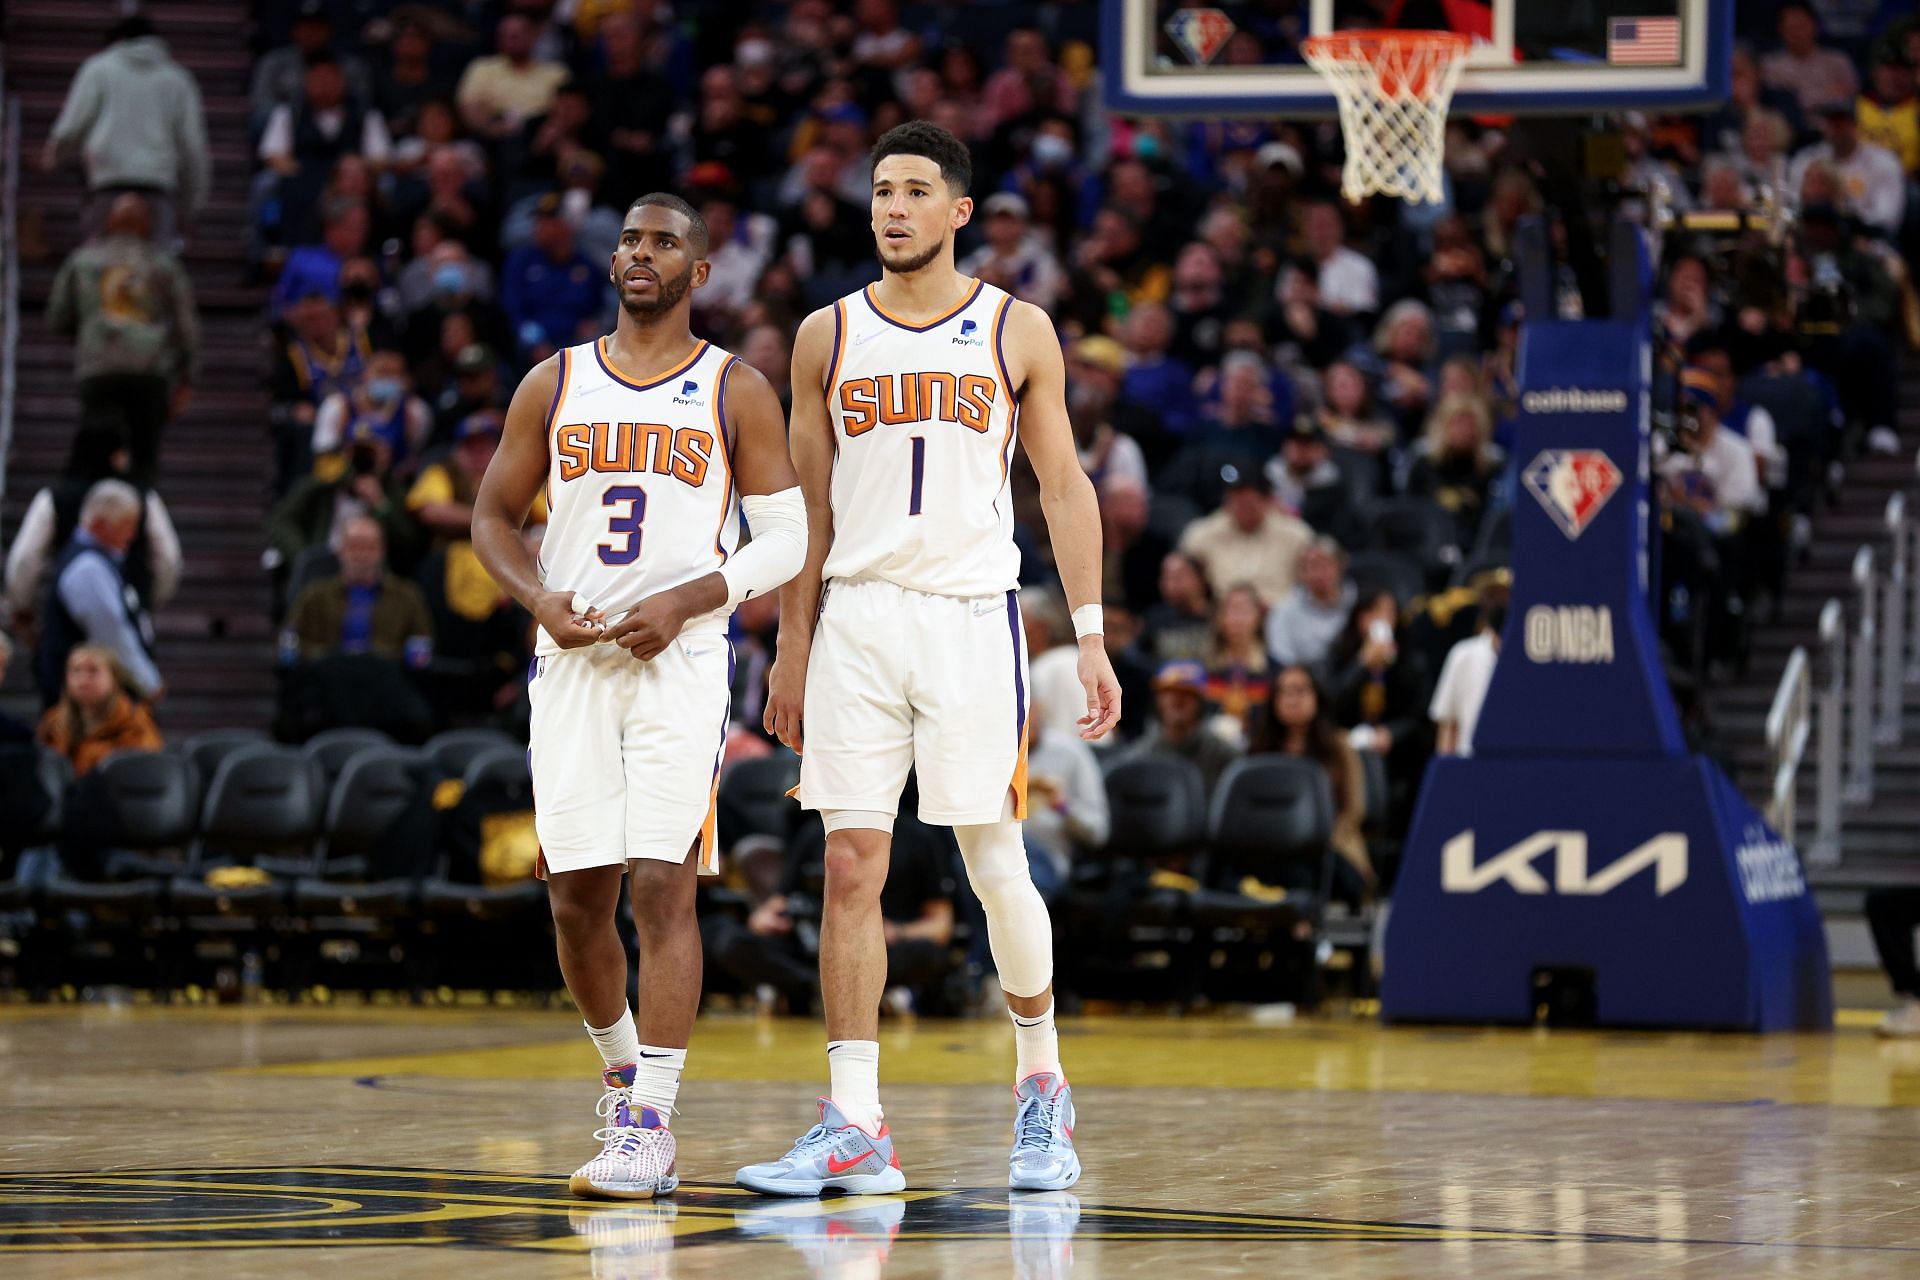 Phoenix Suns v Golden State Warriors; Devin Booker and Chris Paul standing side by side